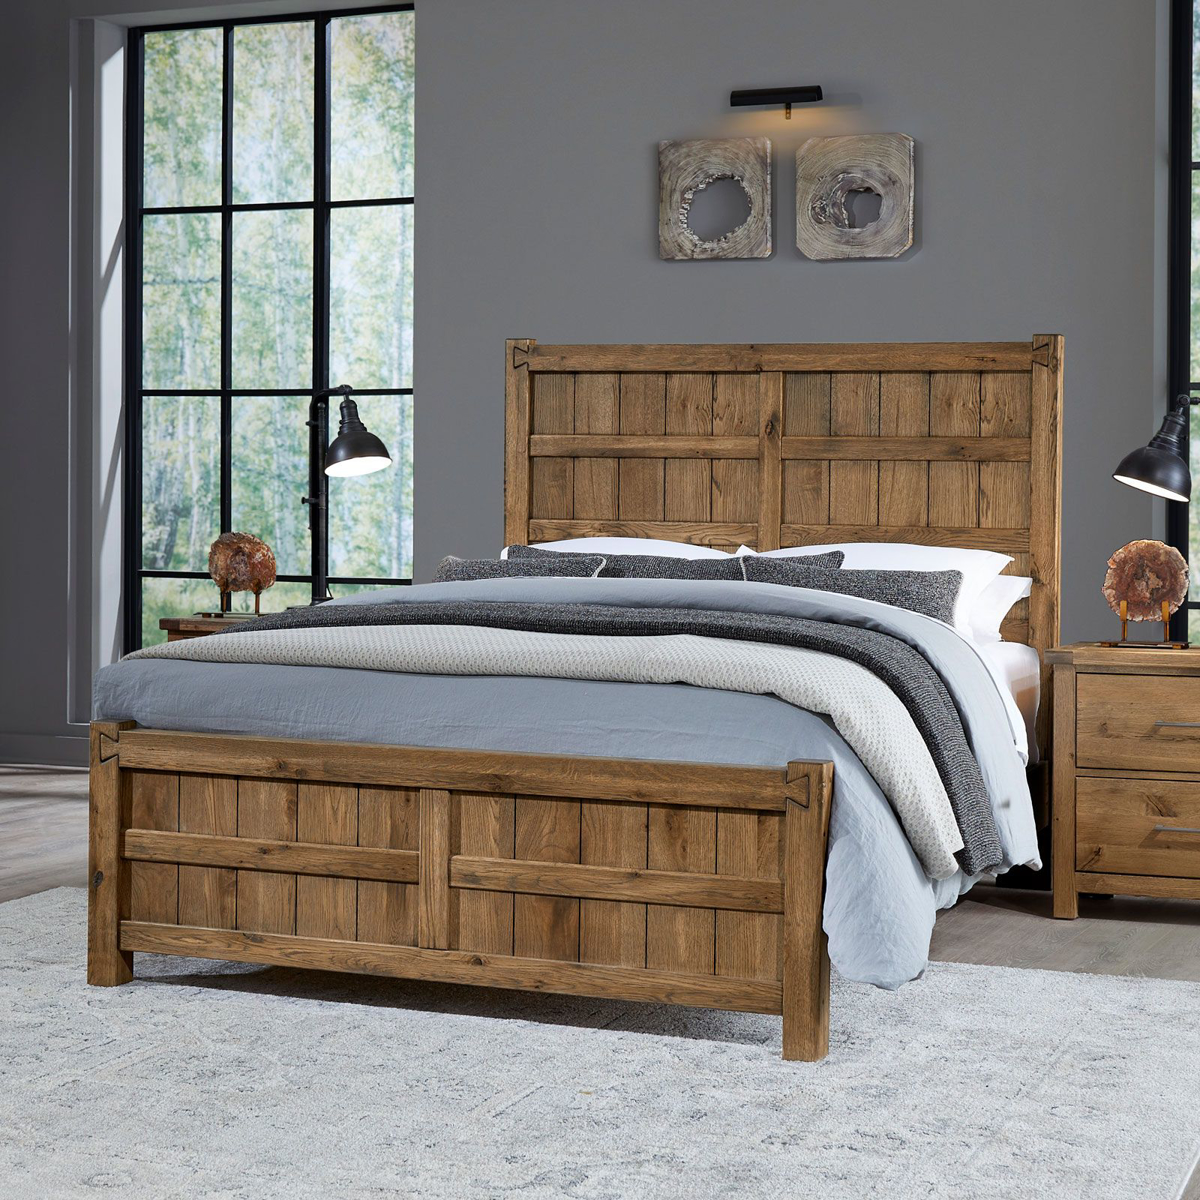 Picture of Natural Board & Batten King Bed